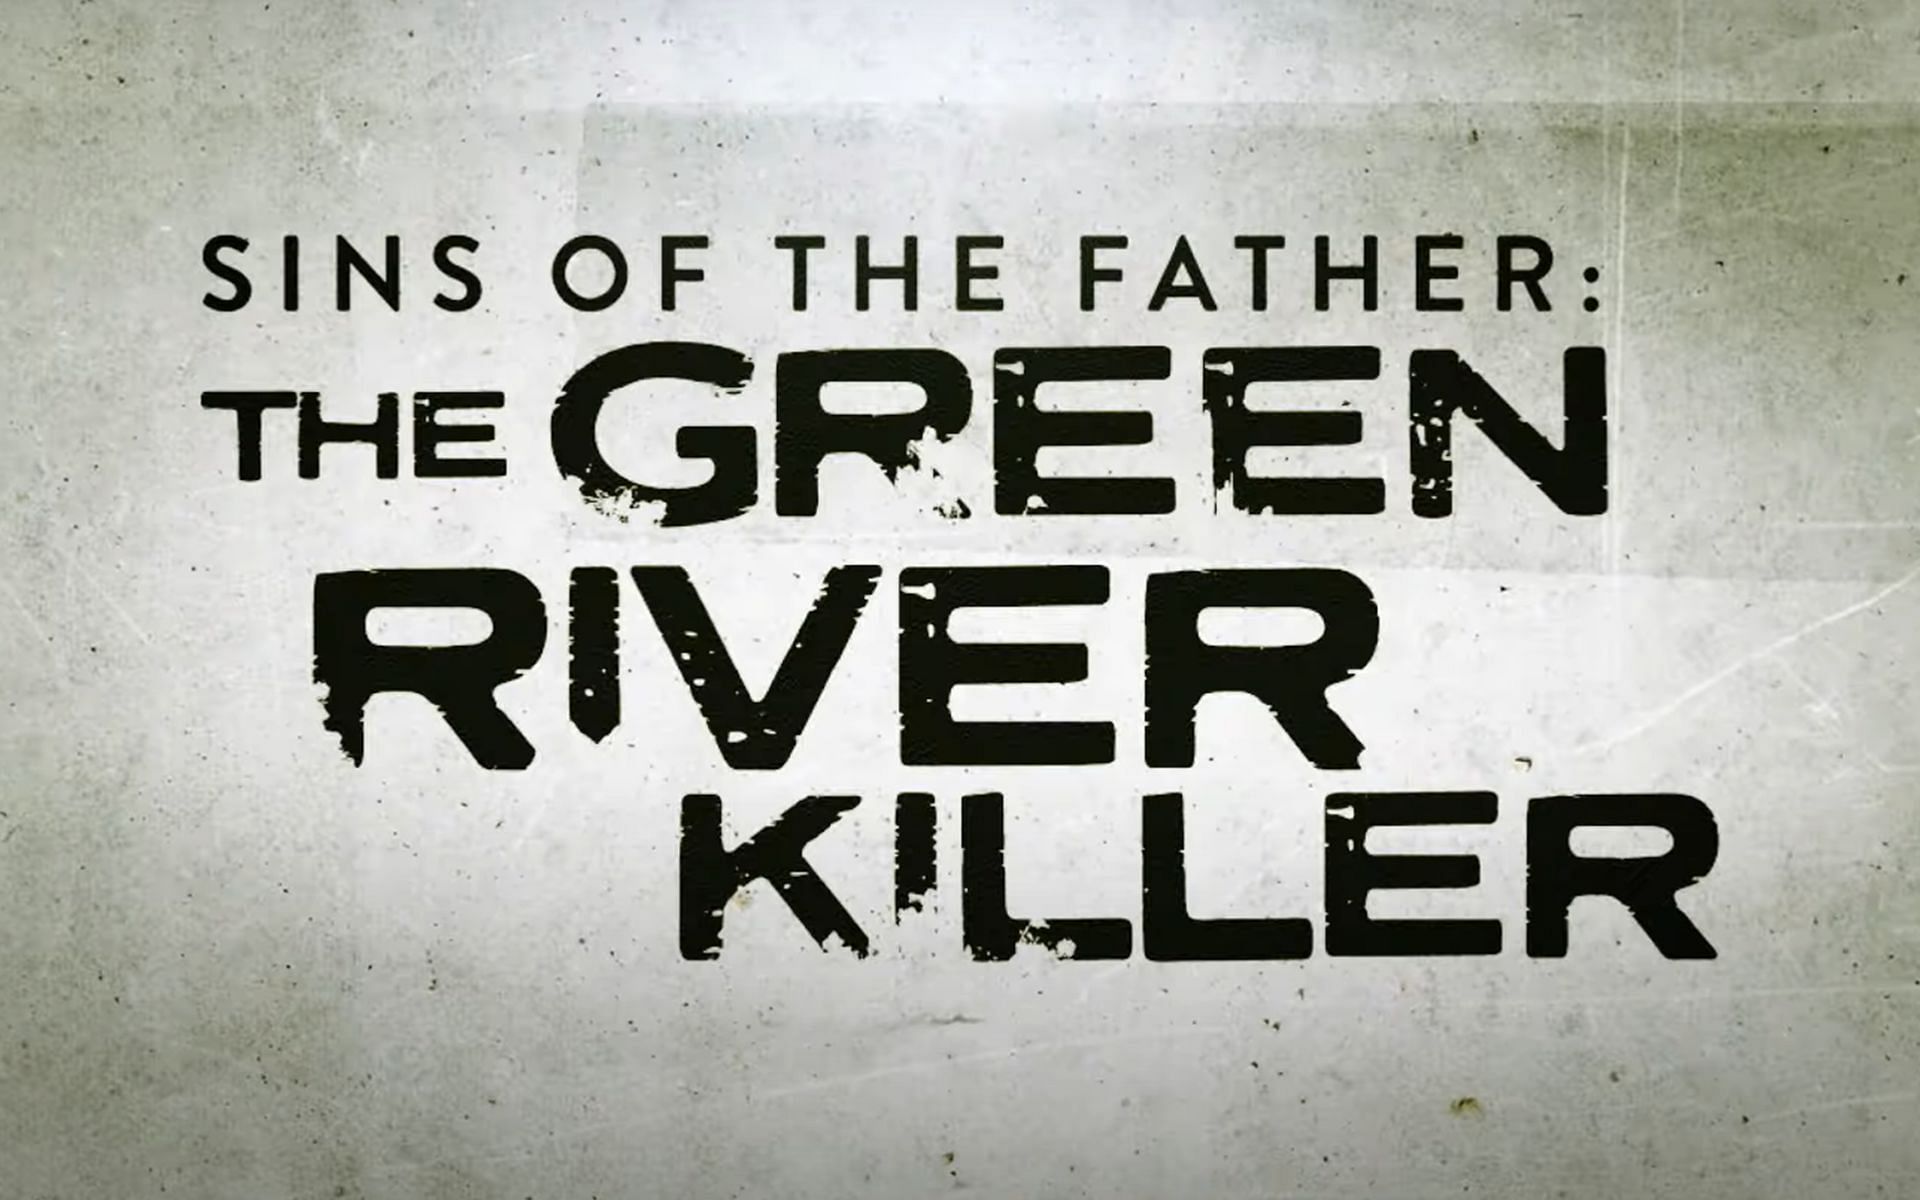 Sins of the Father: The Green River Killer (Image via Tubi @YouTube)